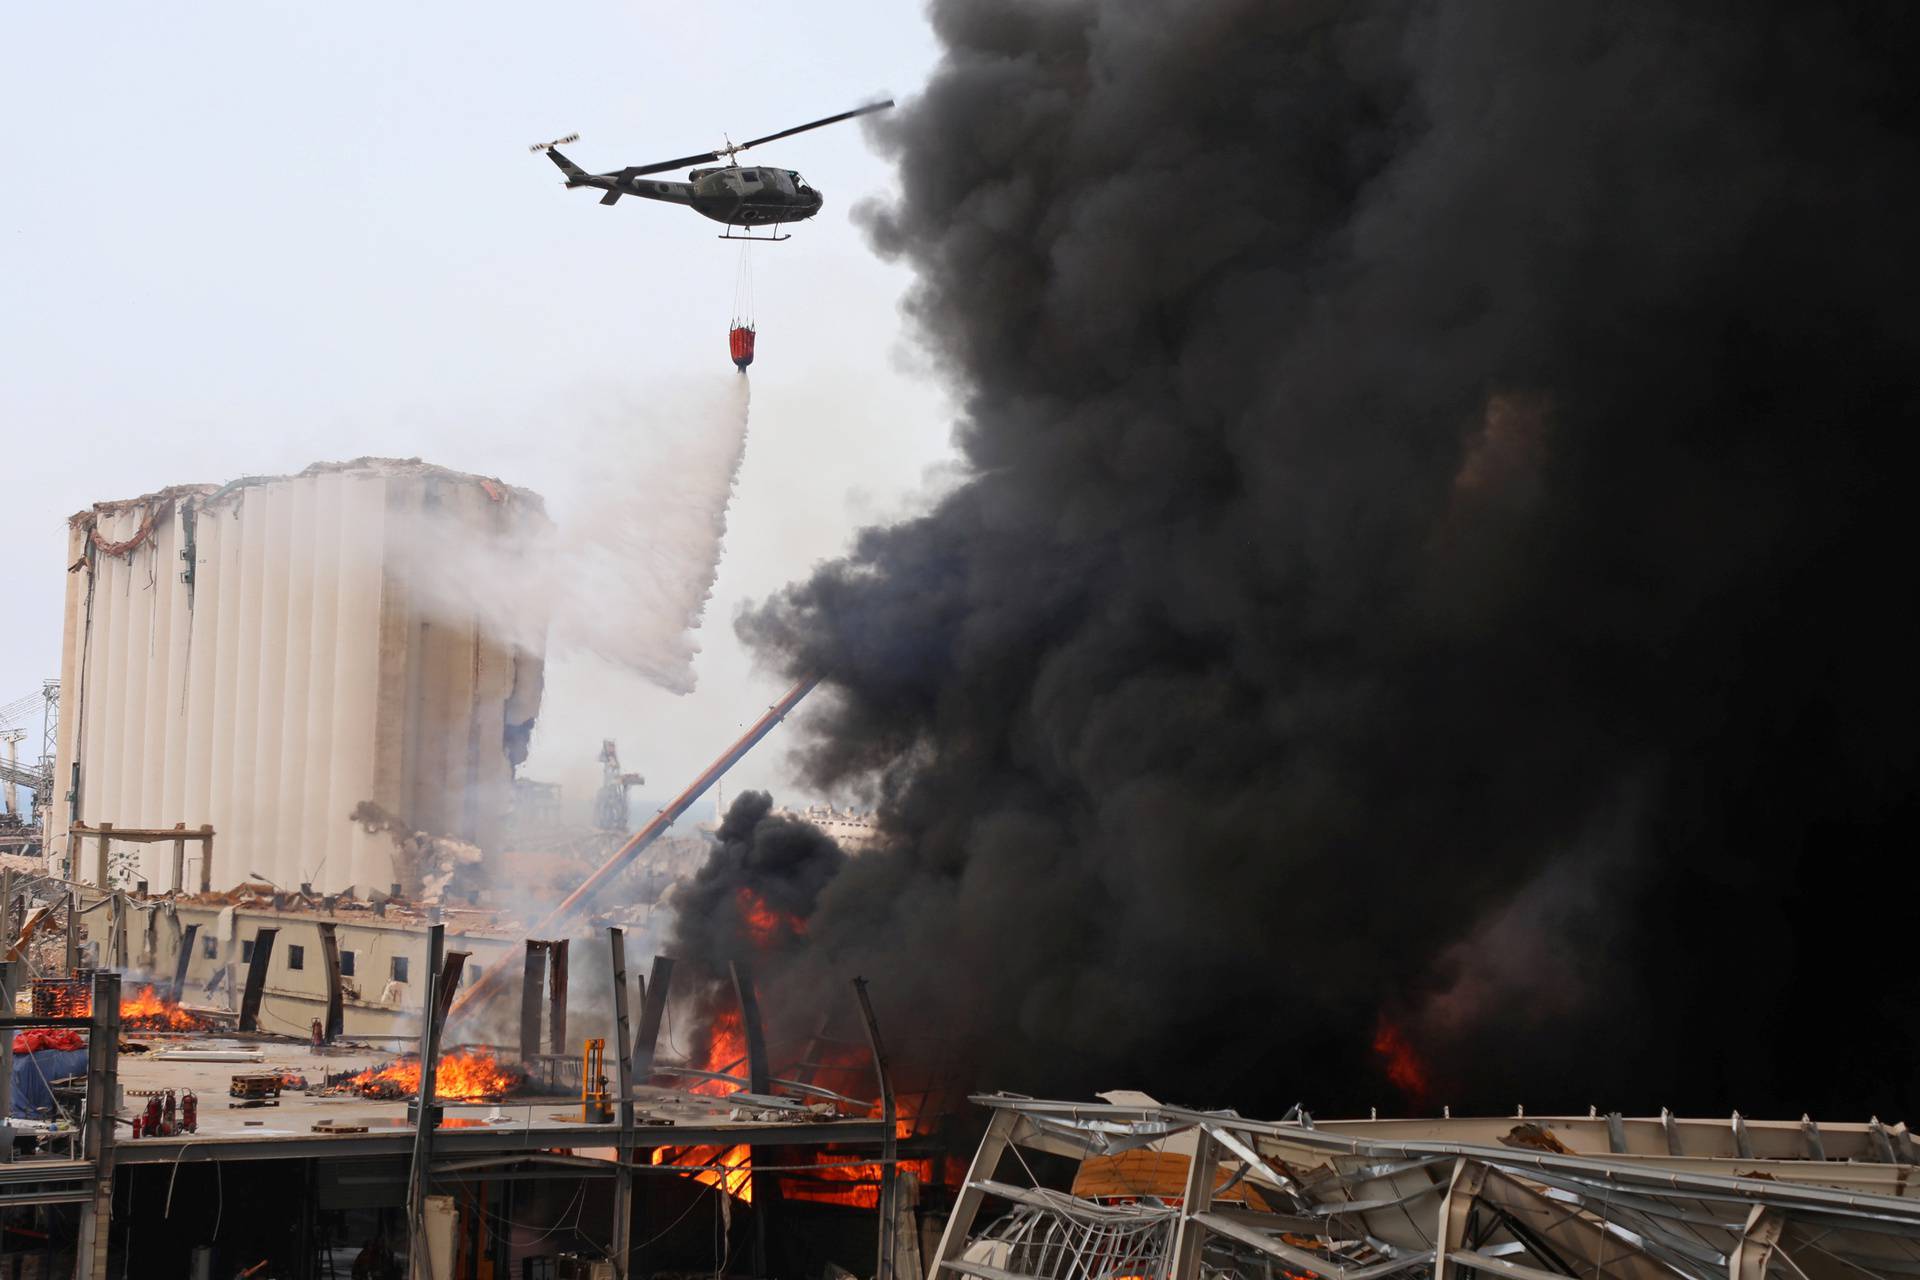 Fire breaks out at Beirut's port area